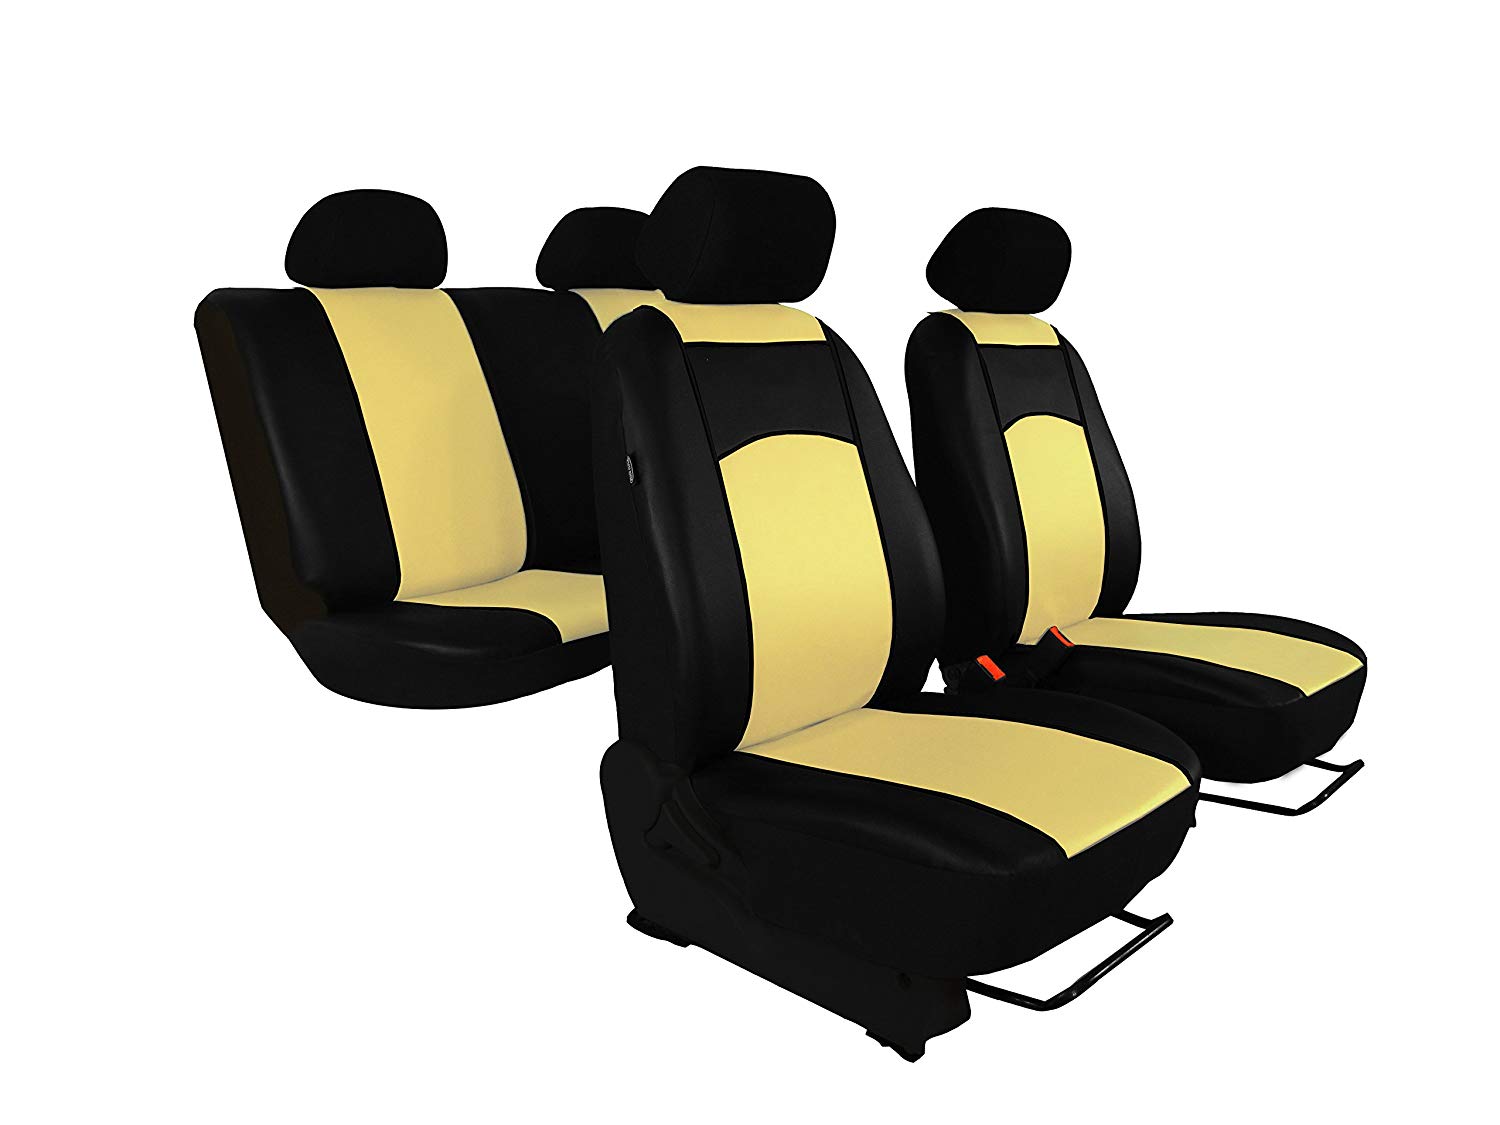 POK-TER-TUNING For SX4 S-Crossab 2013 high-quality, custom-fit seat covers, faux leather seat covers, 7 colours